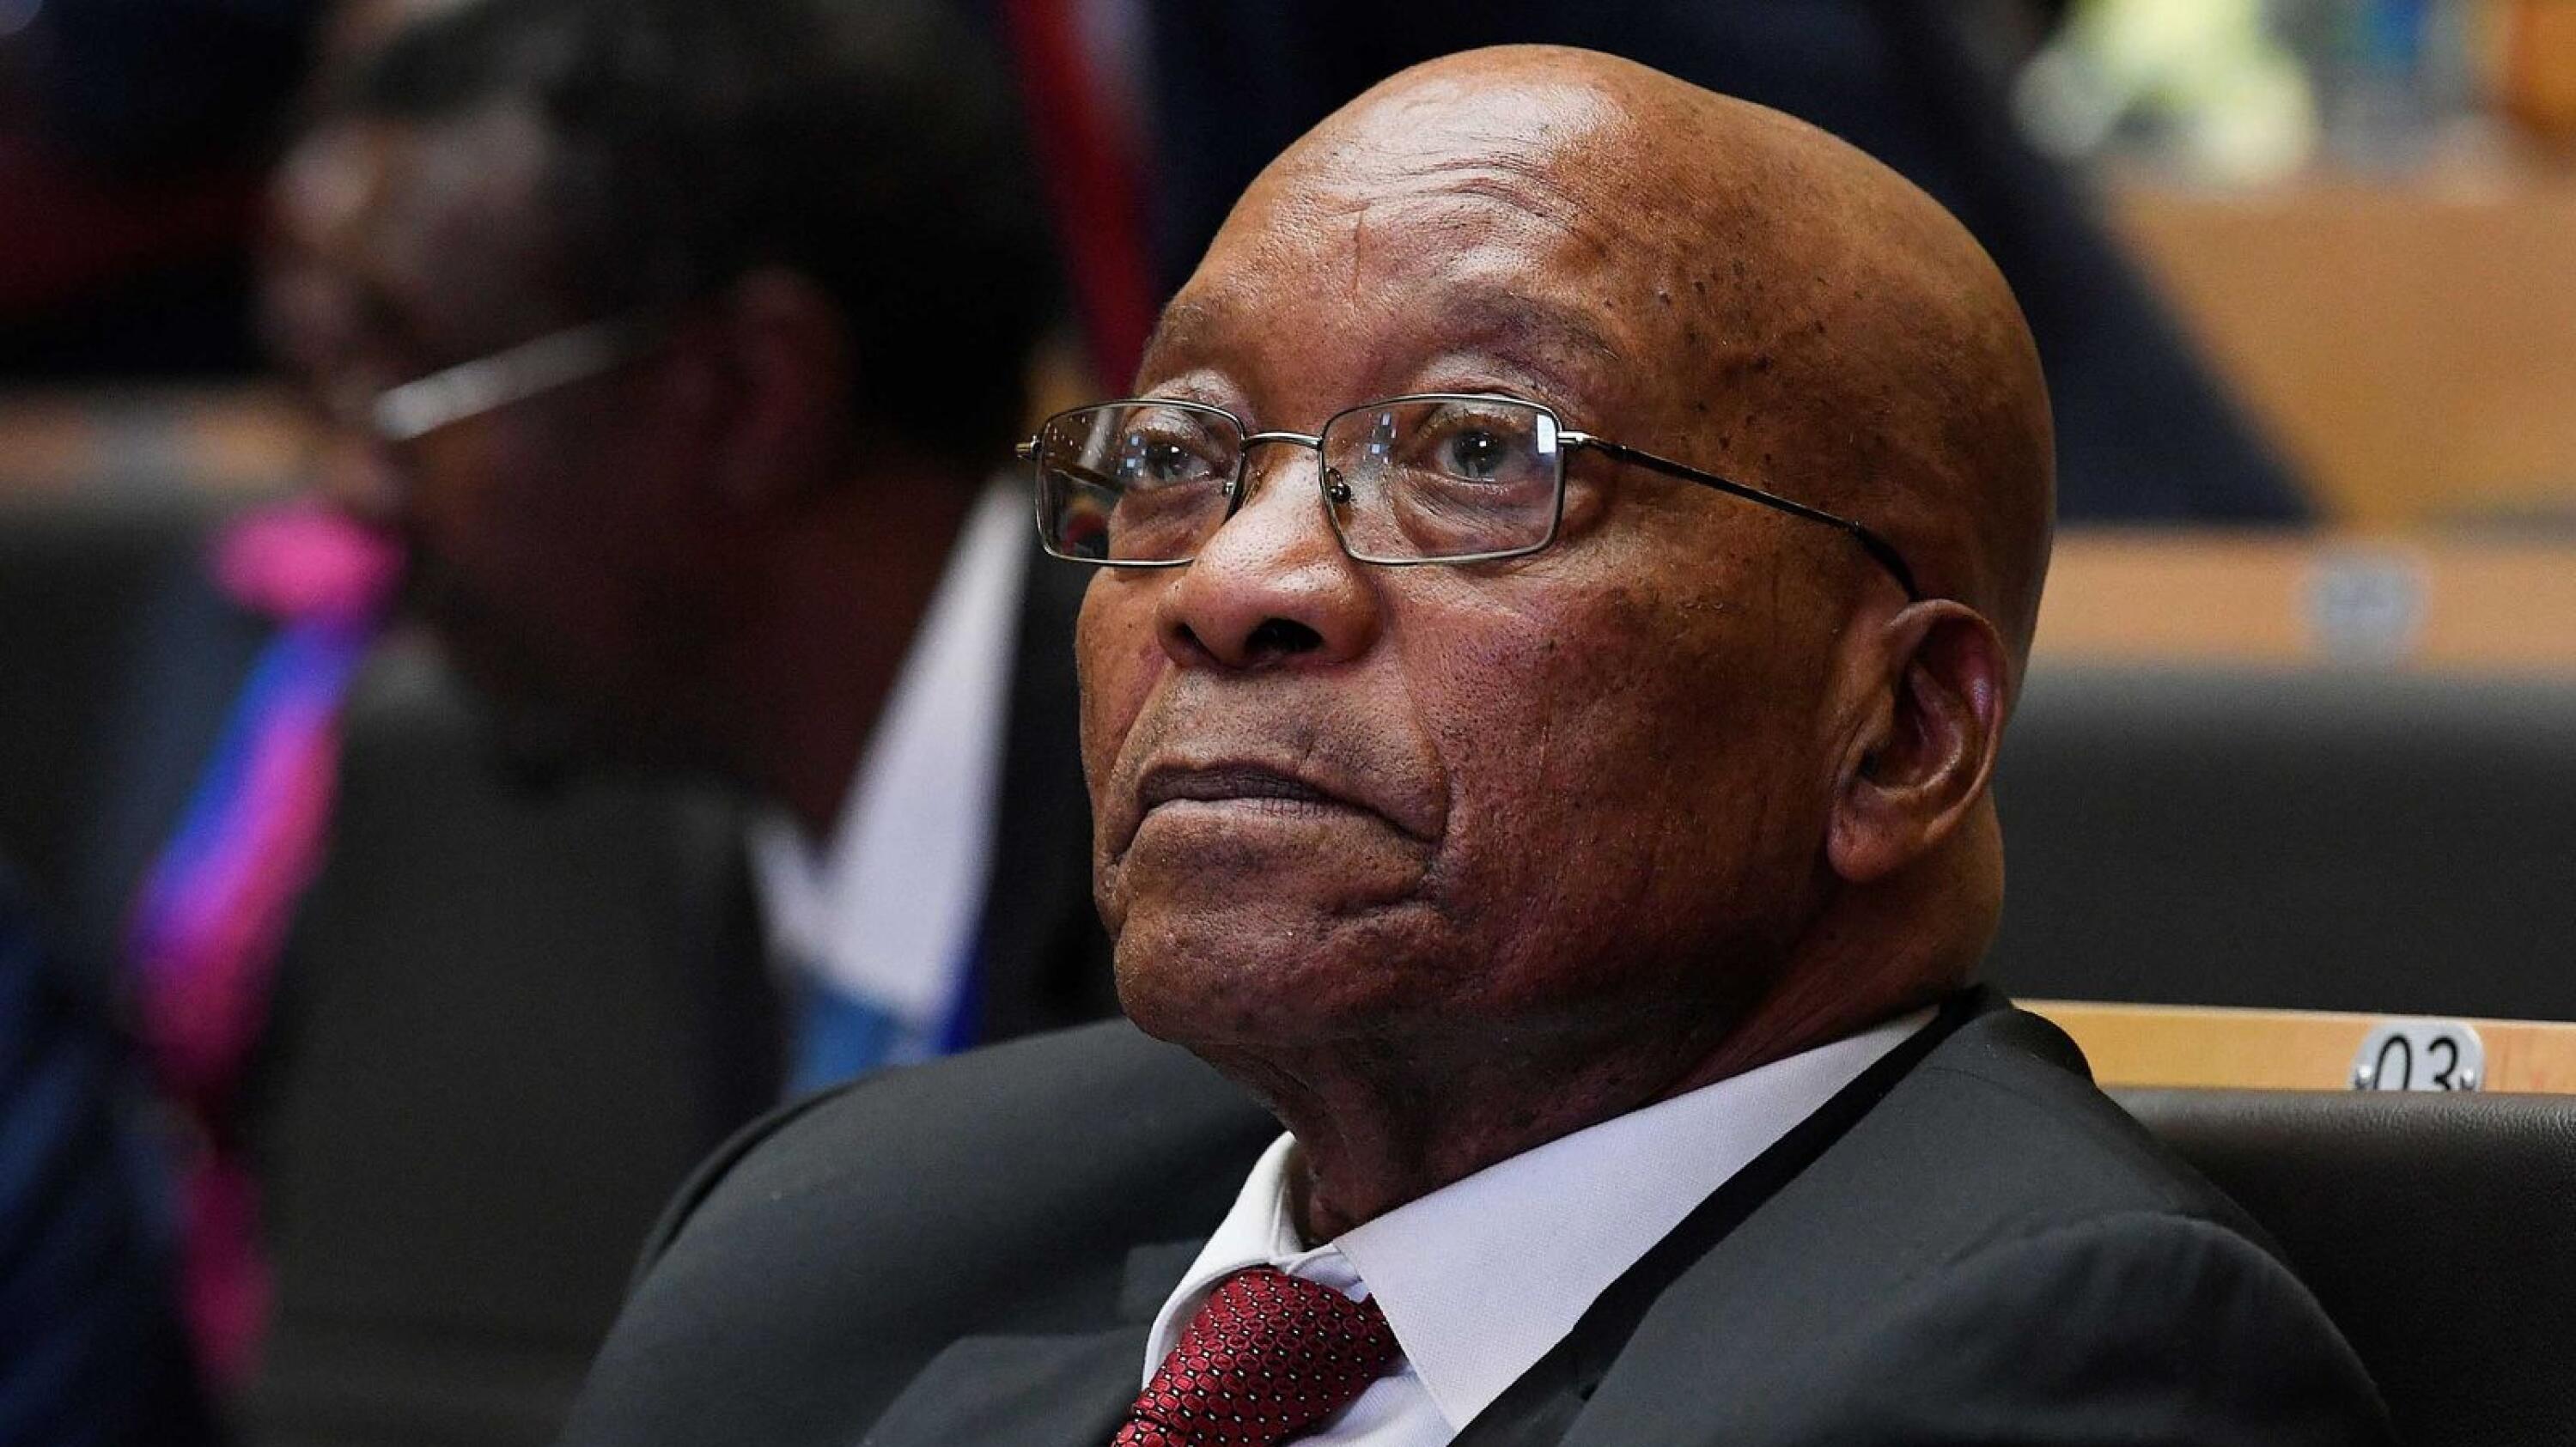 Zuma dressed in a suit seated at a table.